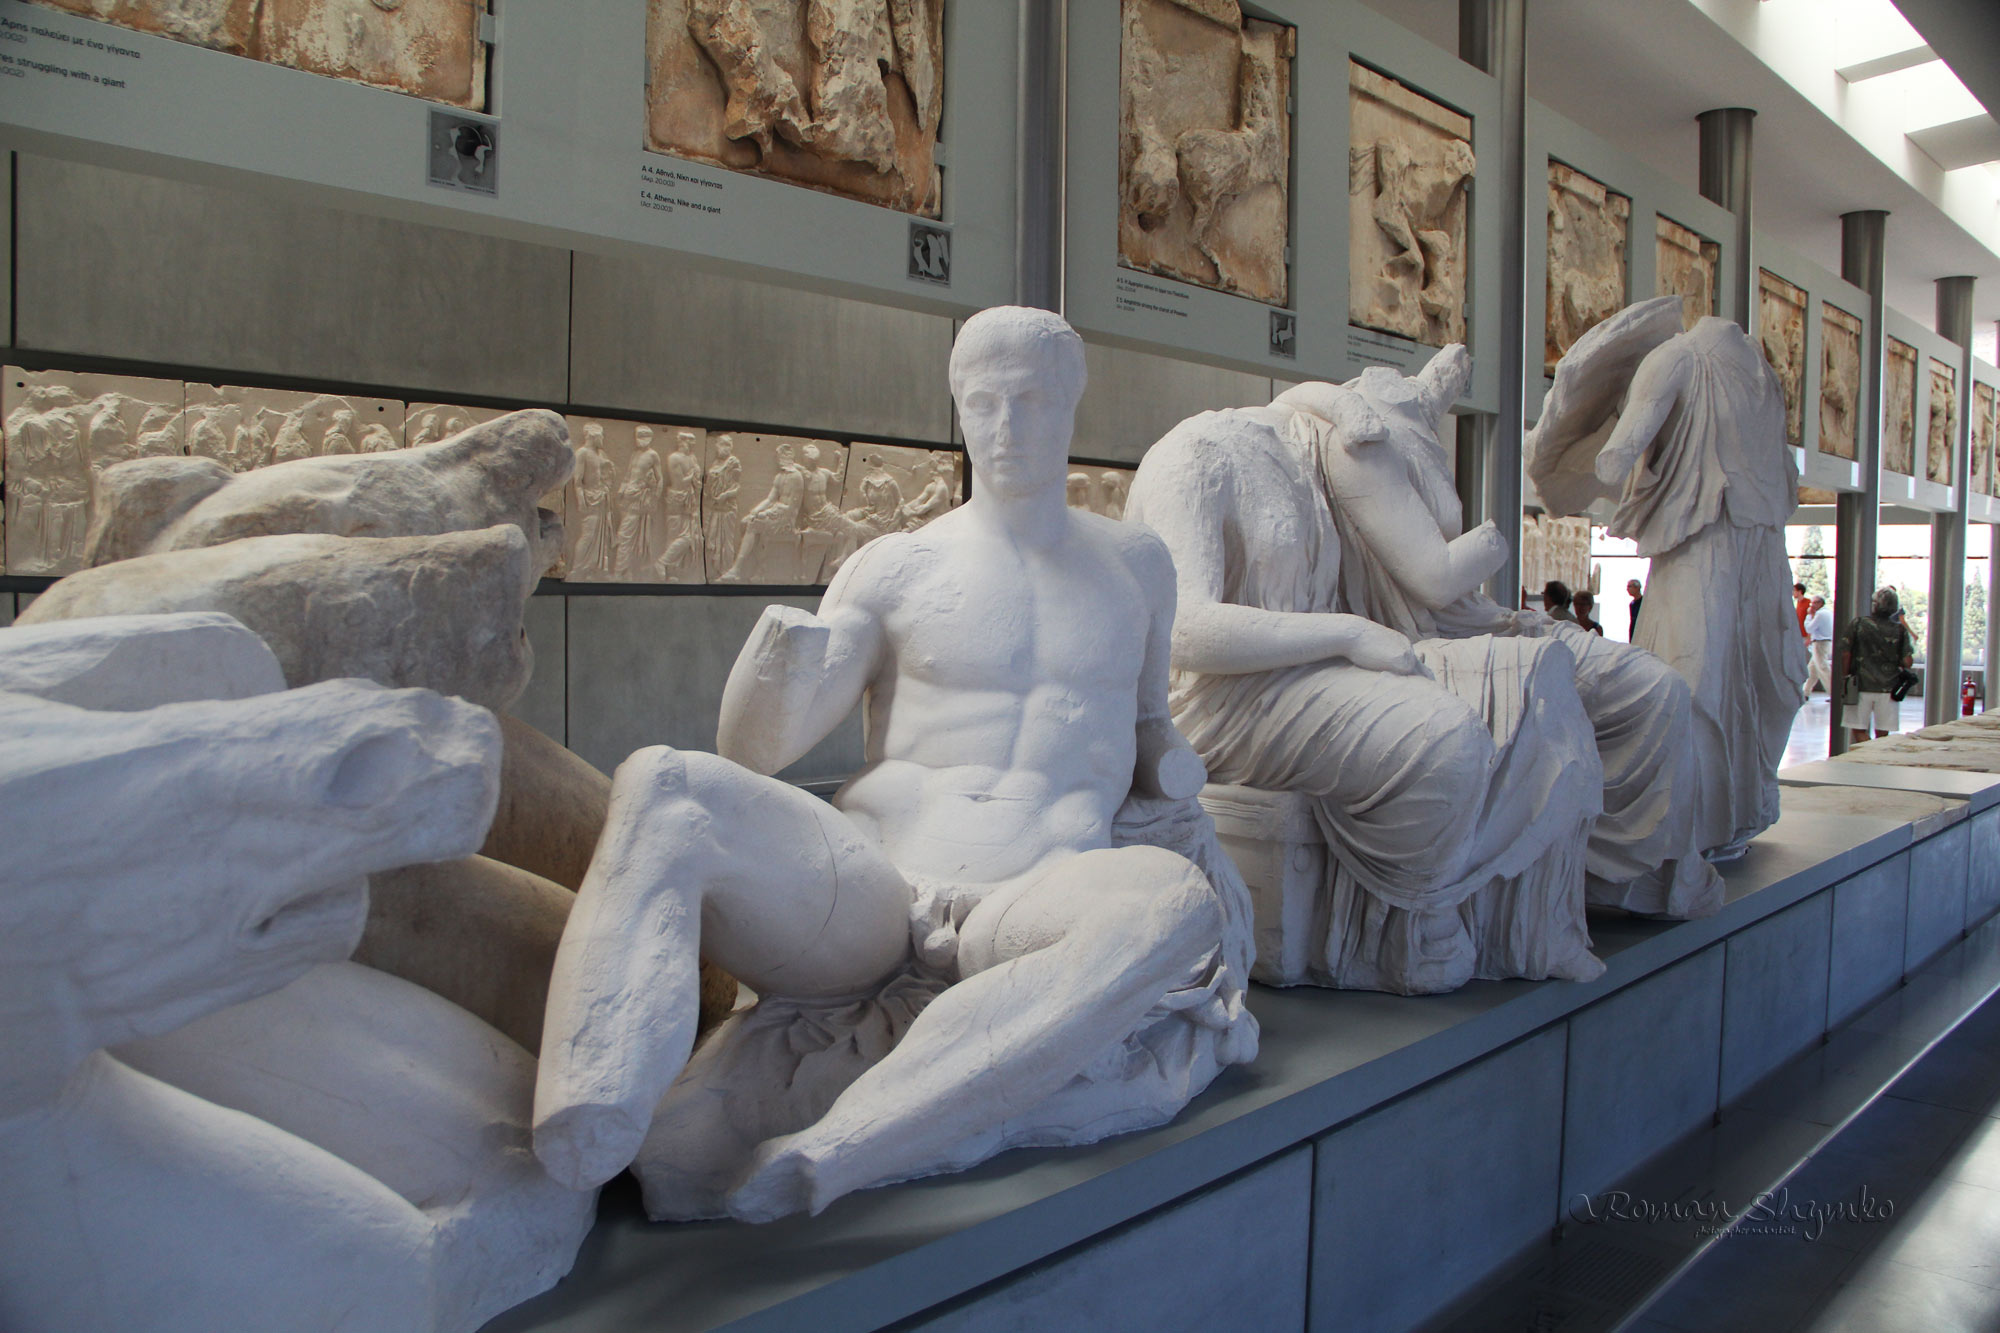 naked-male-statue-museum-ancient-corinth-20151456.jpg 1